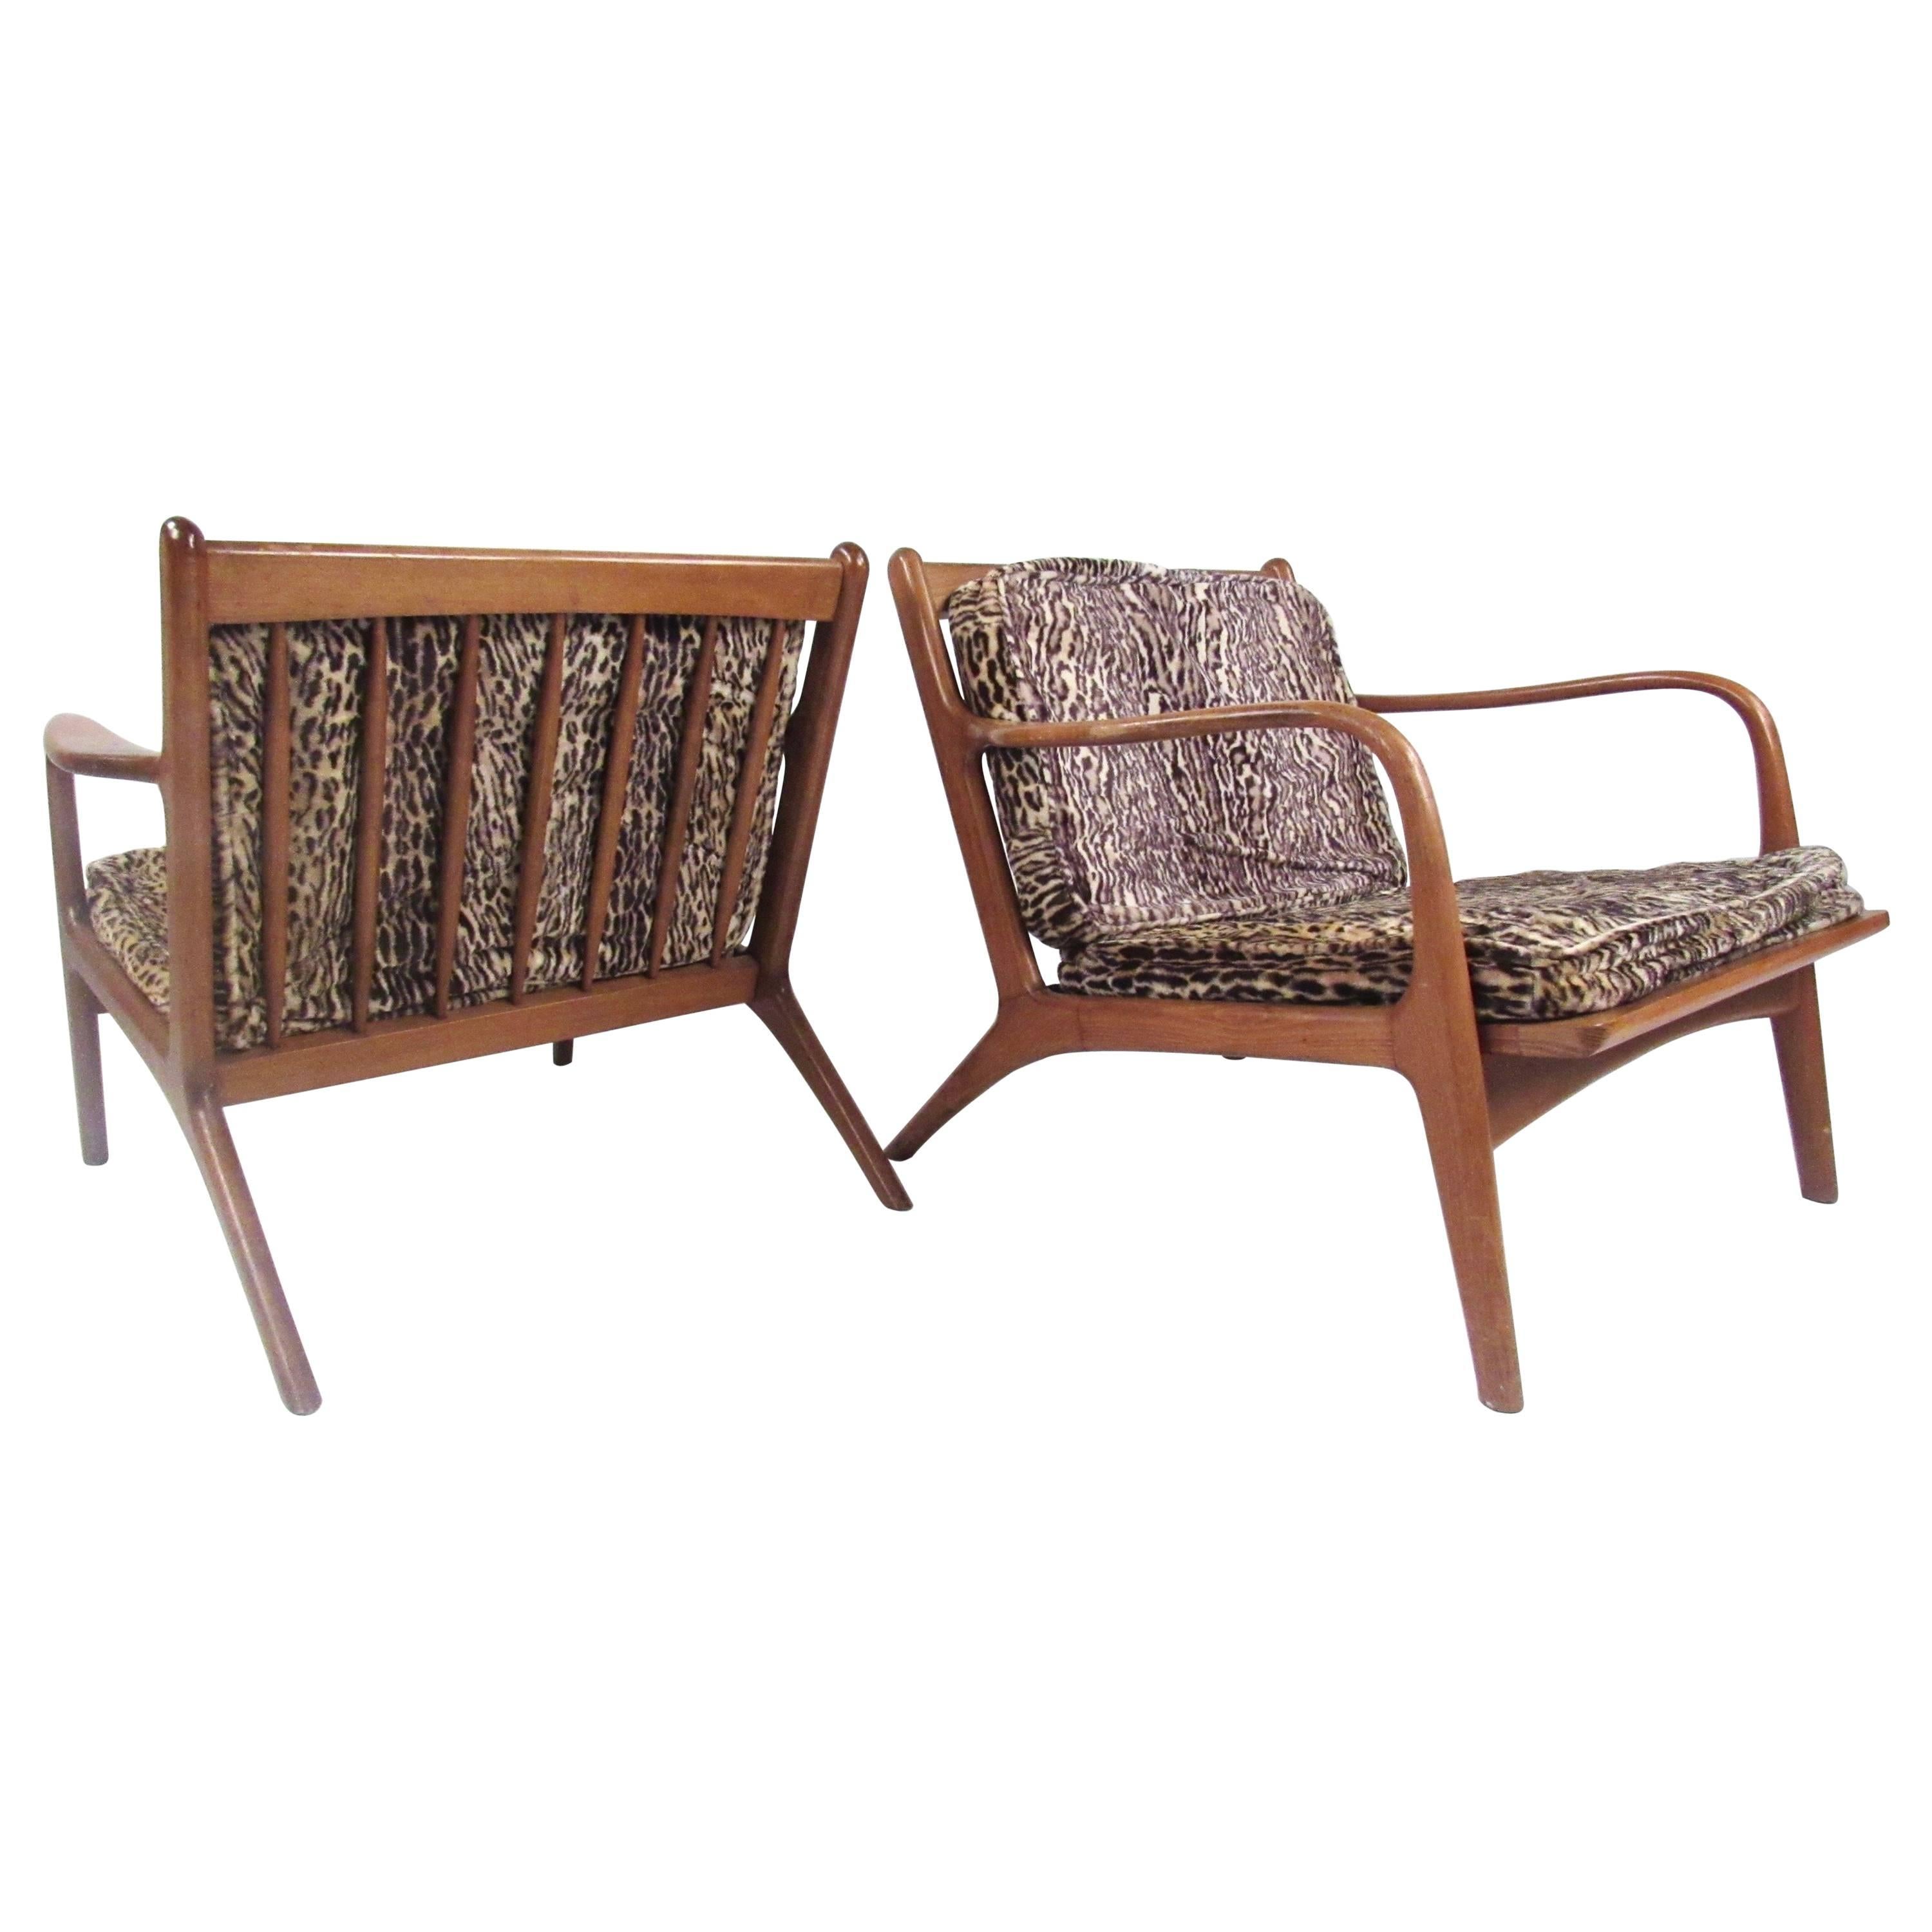 Pair of Mid-Century Modern Walnut Lounge Chairs in the Manner of Folke Ohlsson